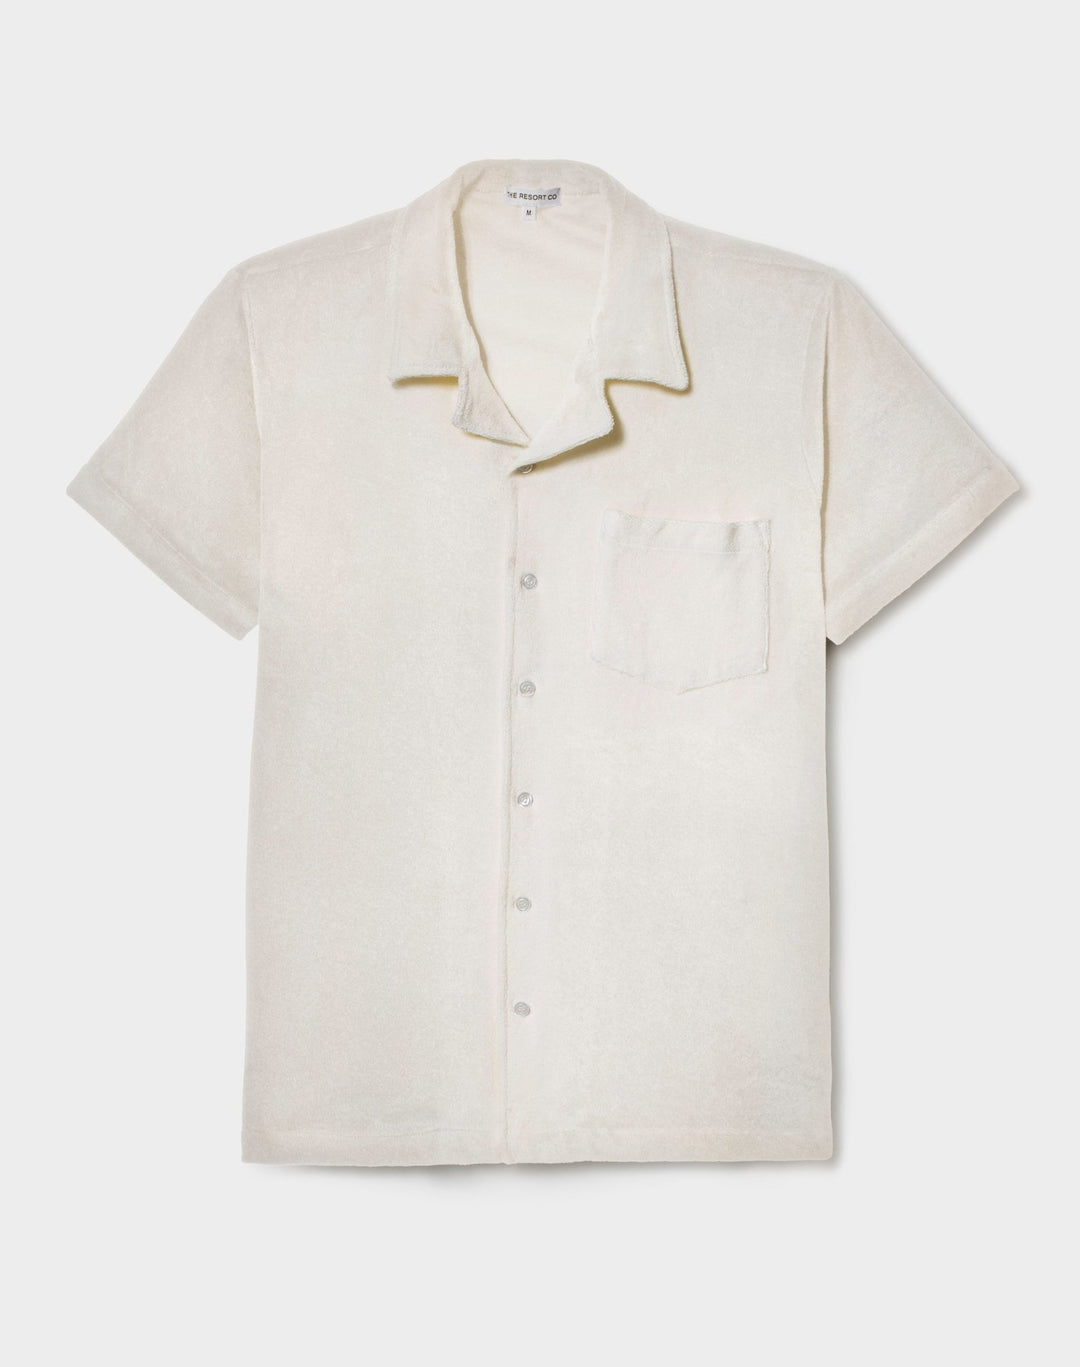 The Best Men's White Shirts Are An Essential In 2023